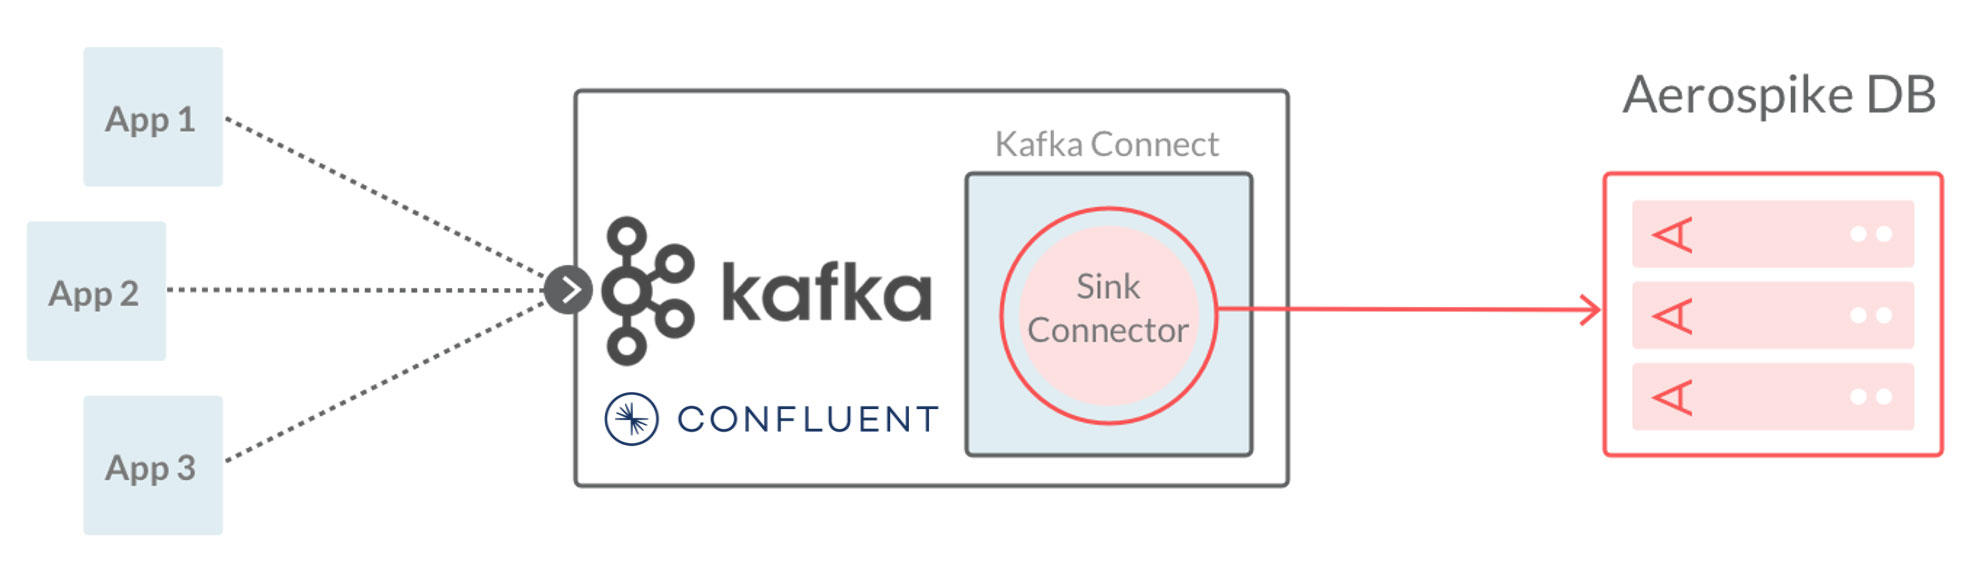 diagram-Connect-for-Kafka-Confluent-Sink-Connector